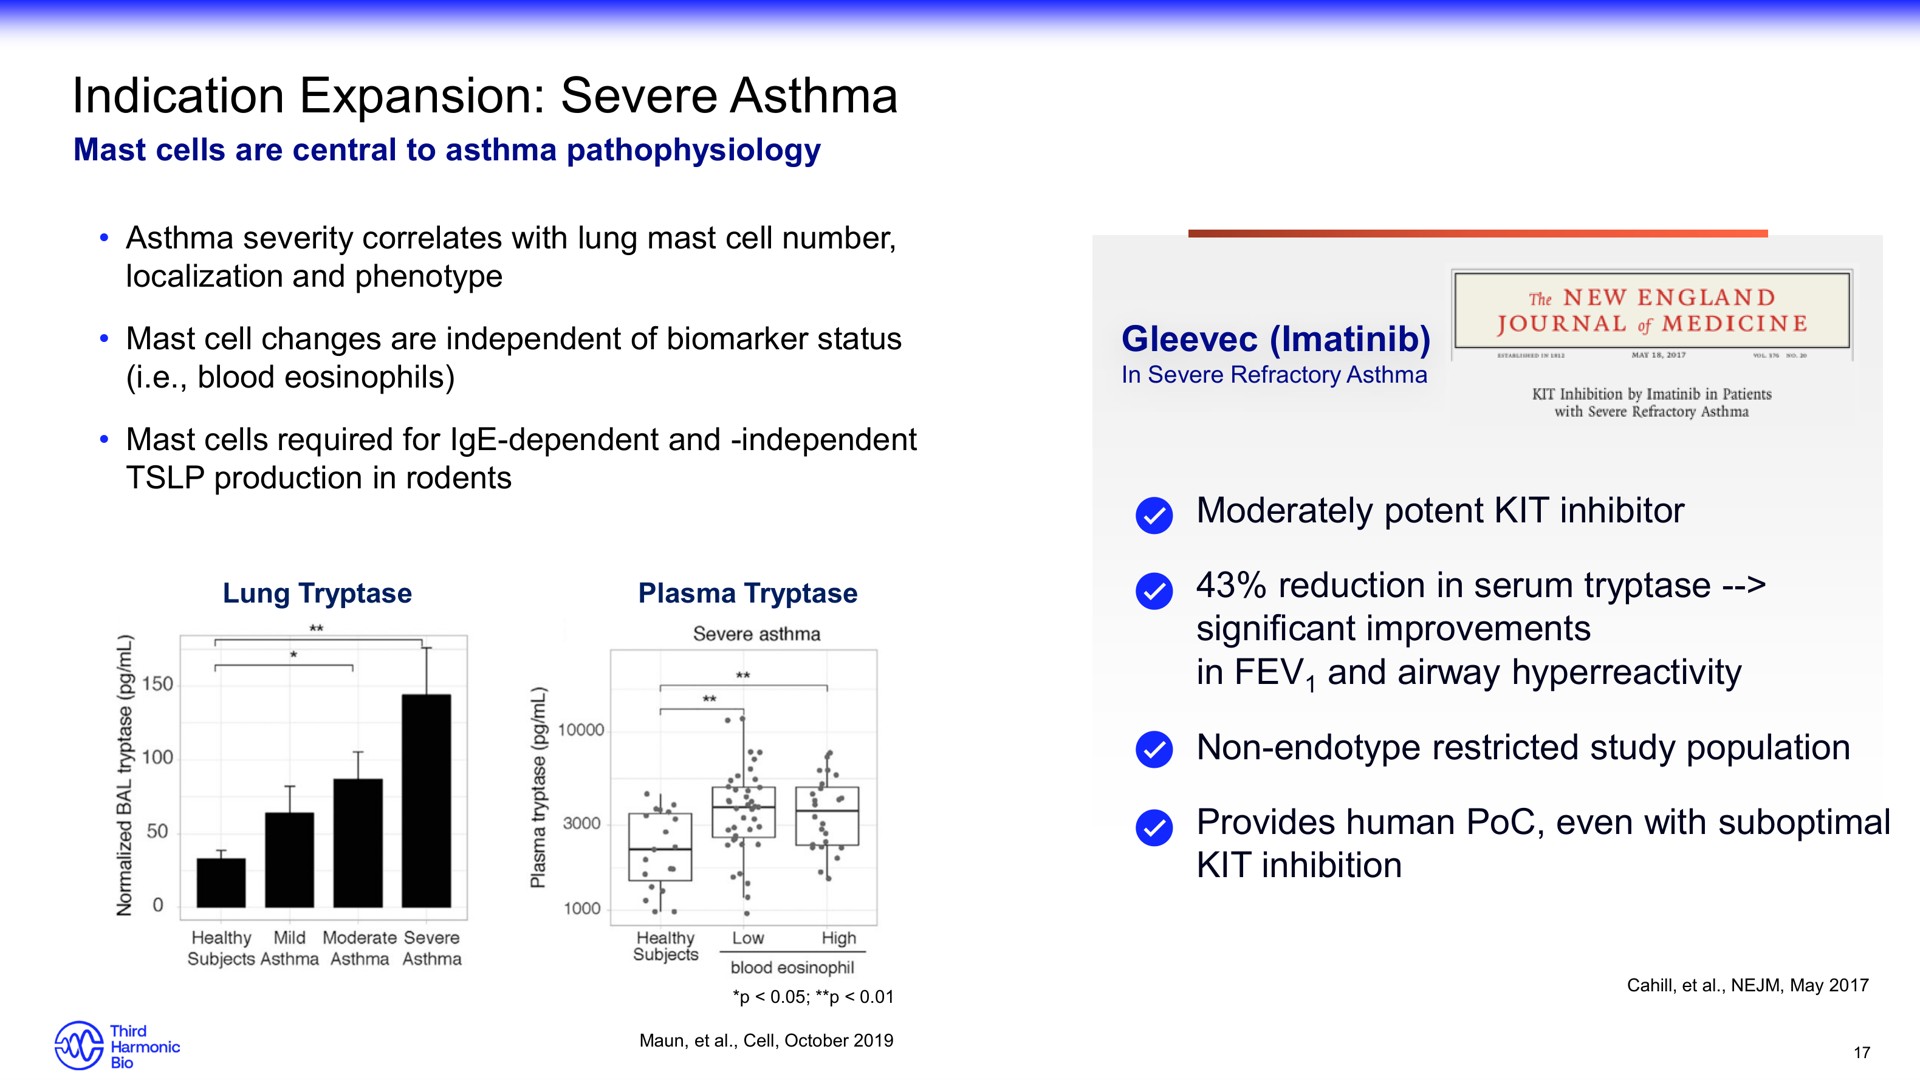 indication expansion severe asthma tor be | Third Harmonic Bio